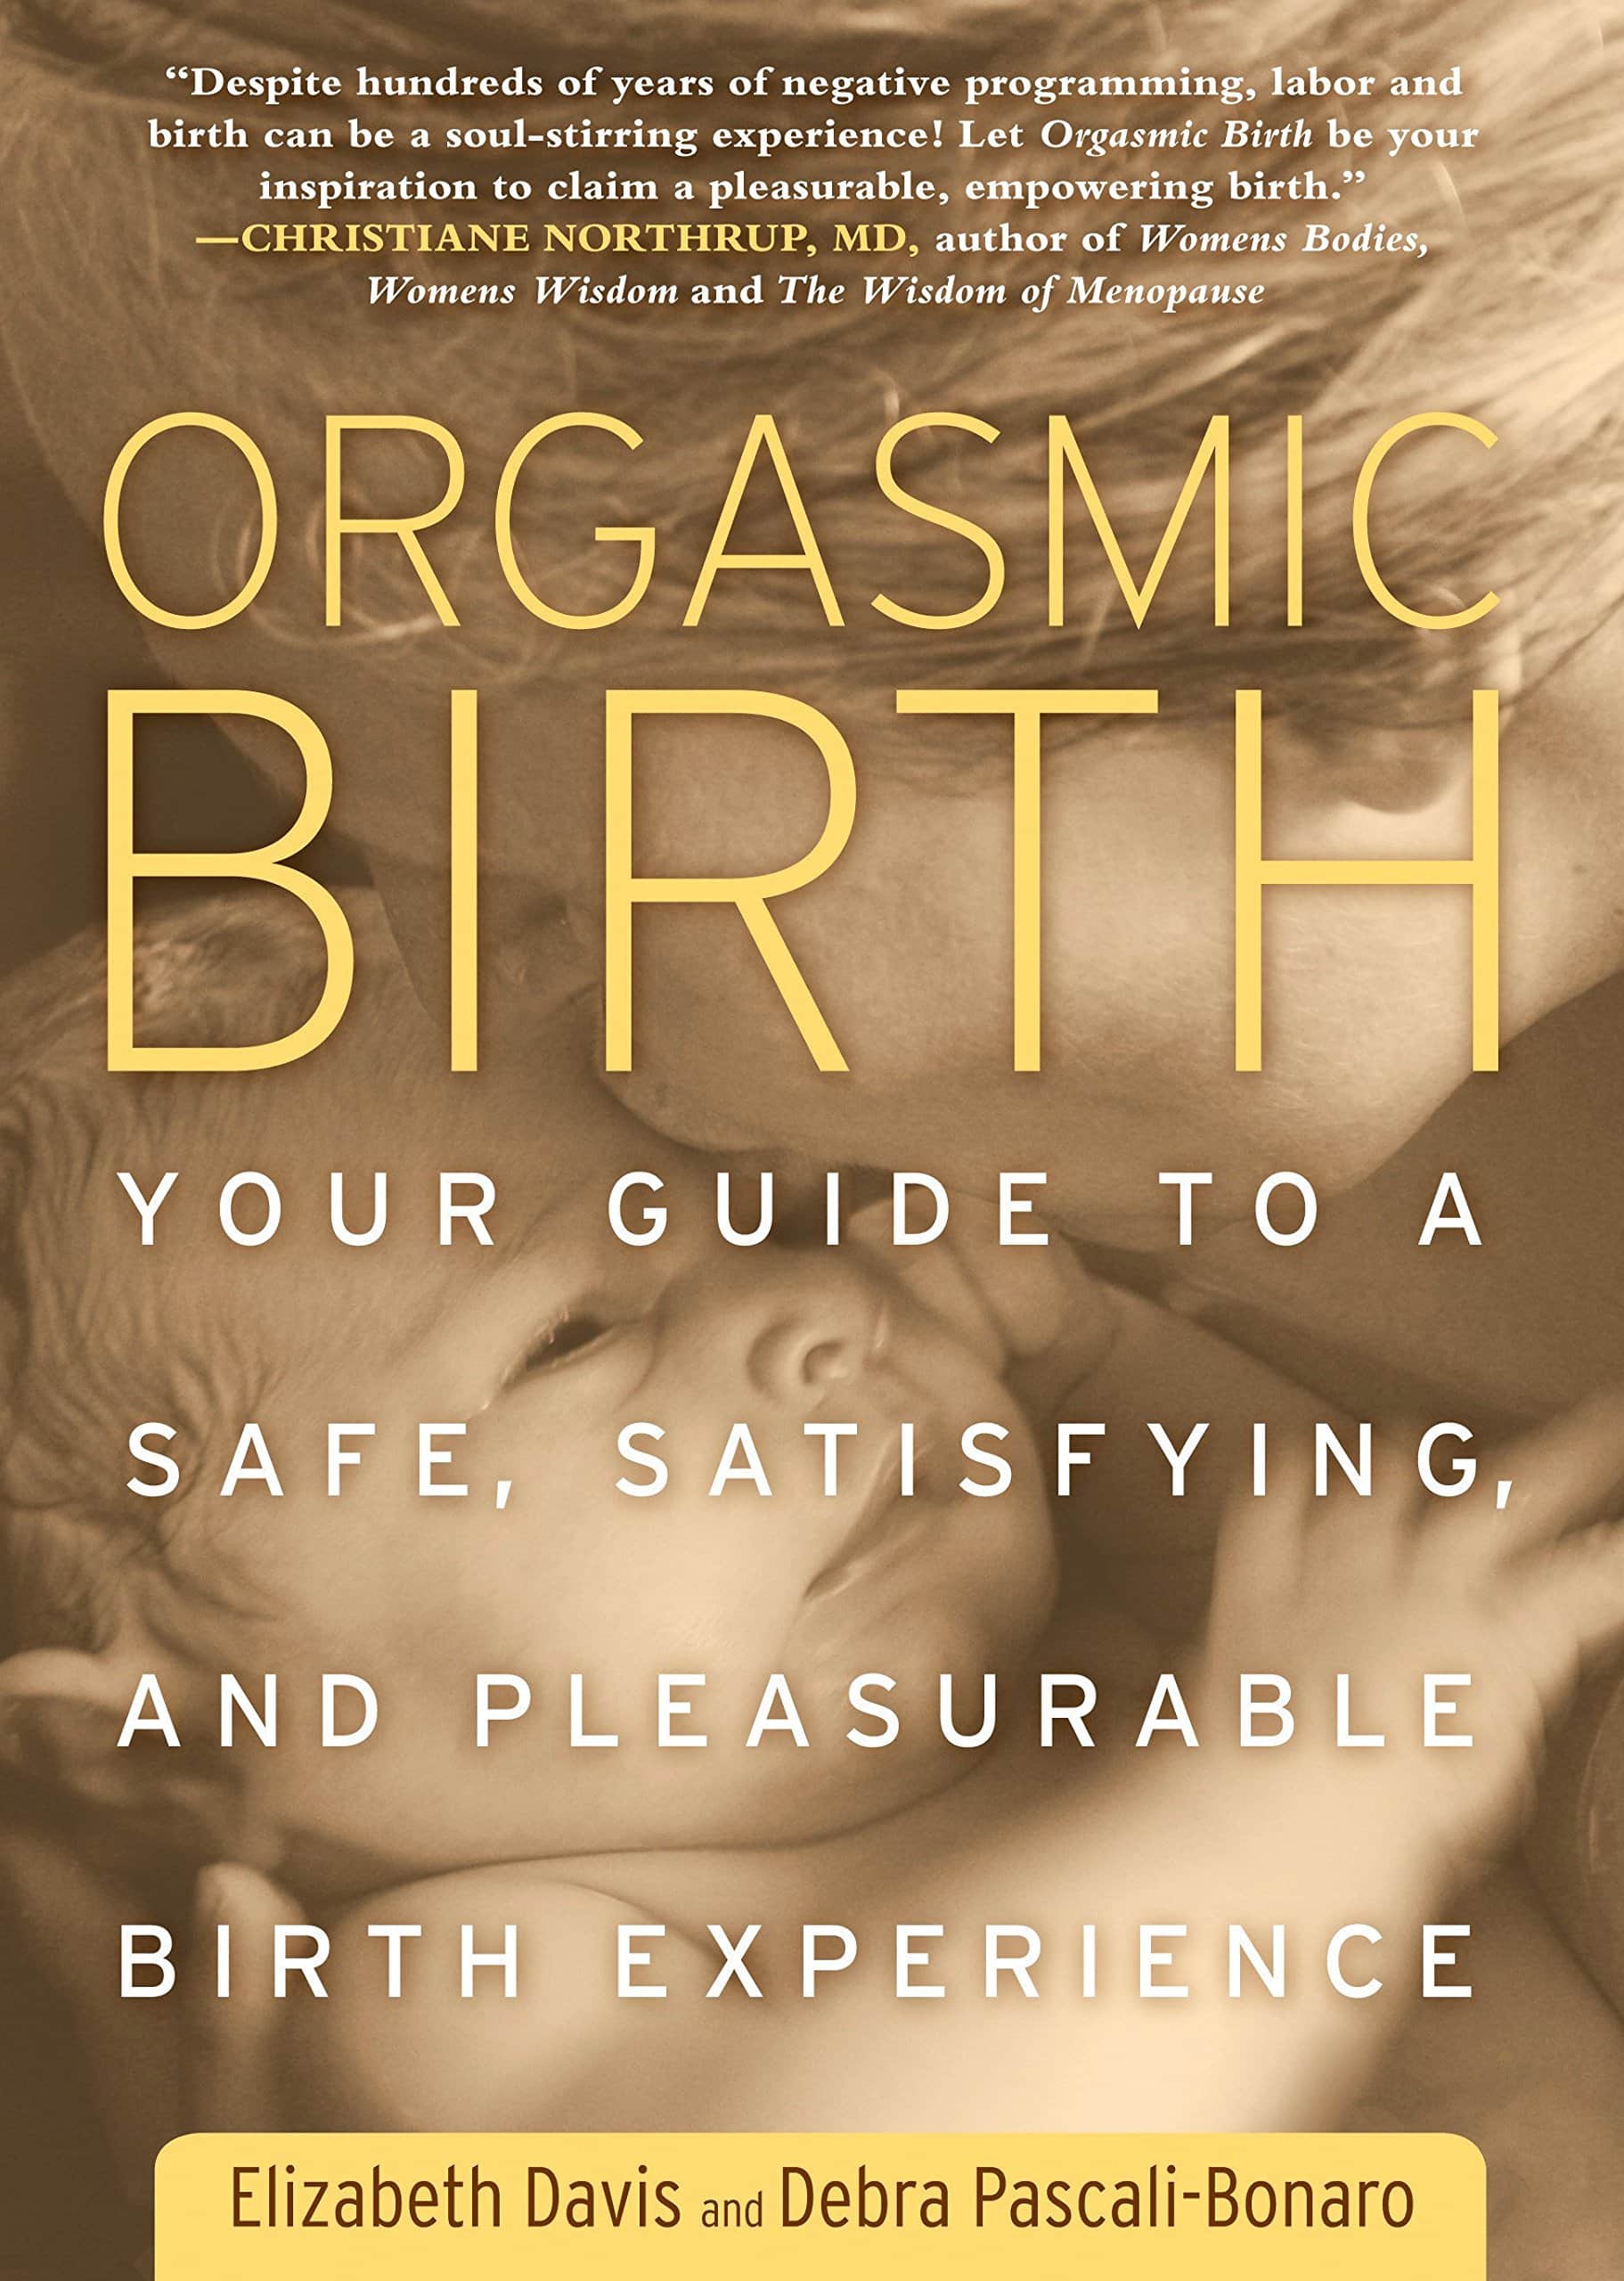 Recommended Pregnancy and Birth Books